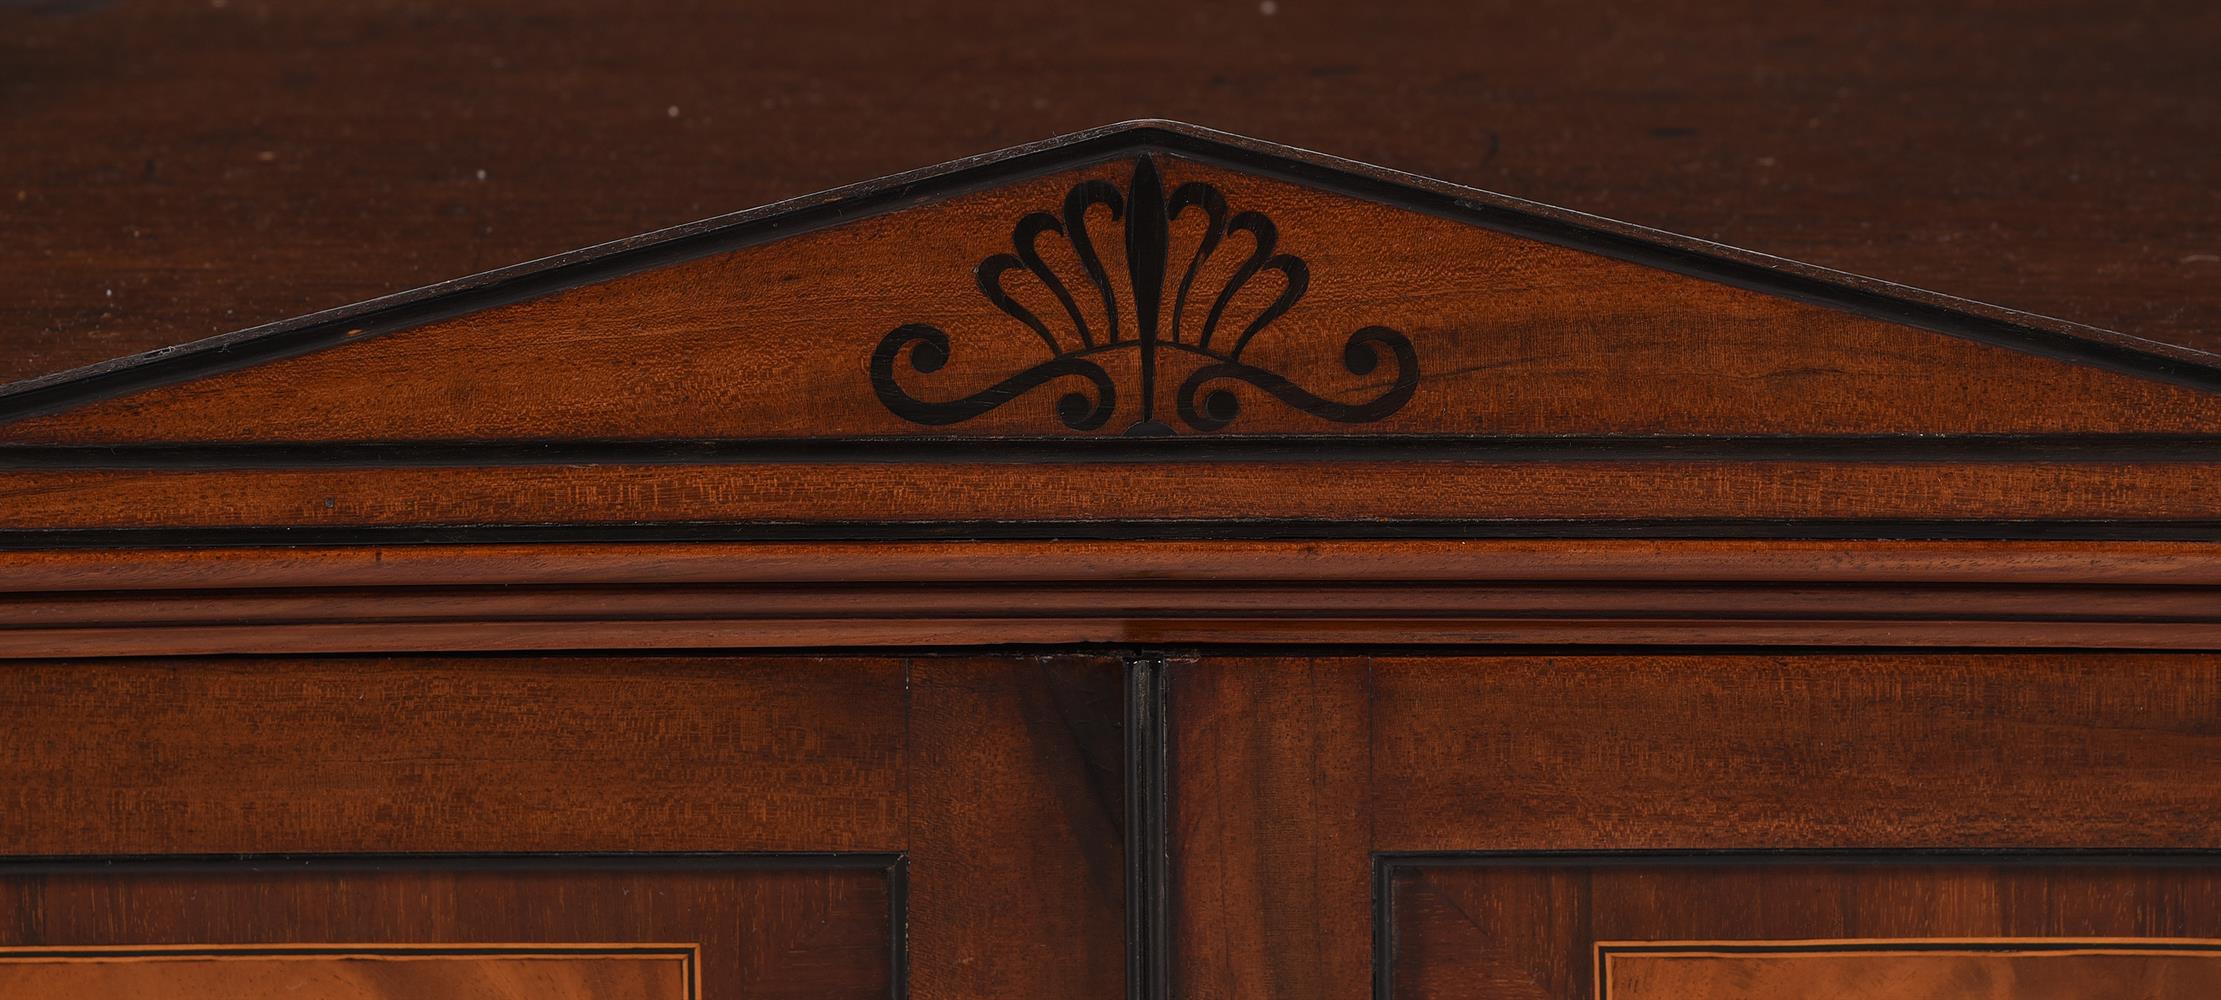 Y A REGENCY MAHOGANY AND EBONY INLAID COLLECTORS CABINET, EARLY 19TH CENTURY - Image 7 of 9